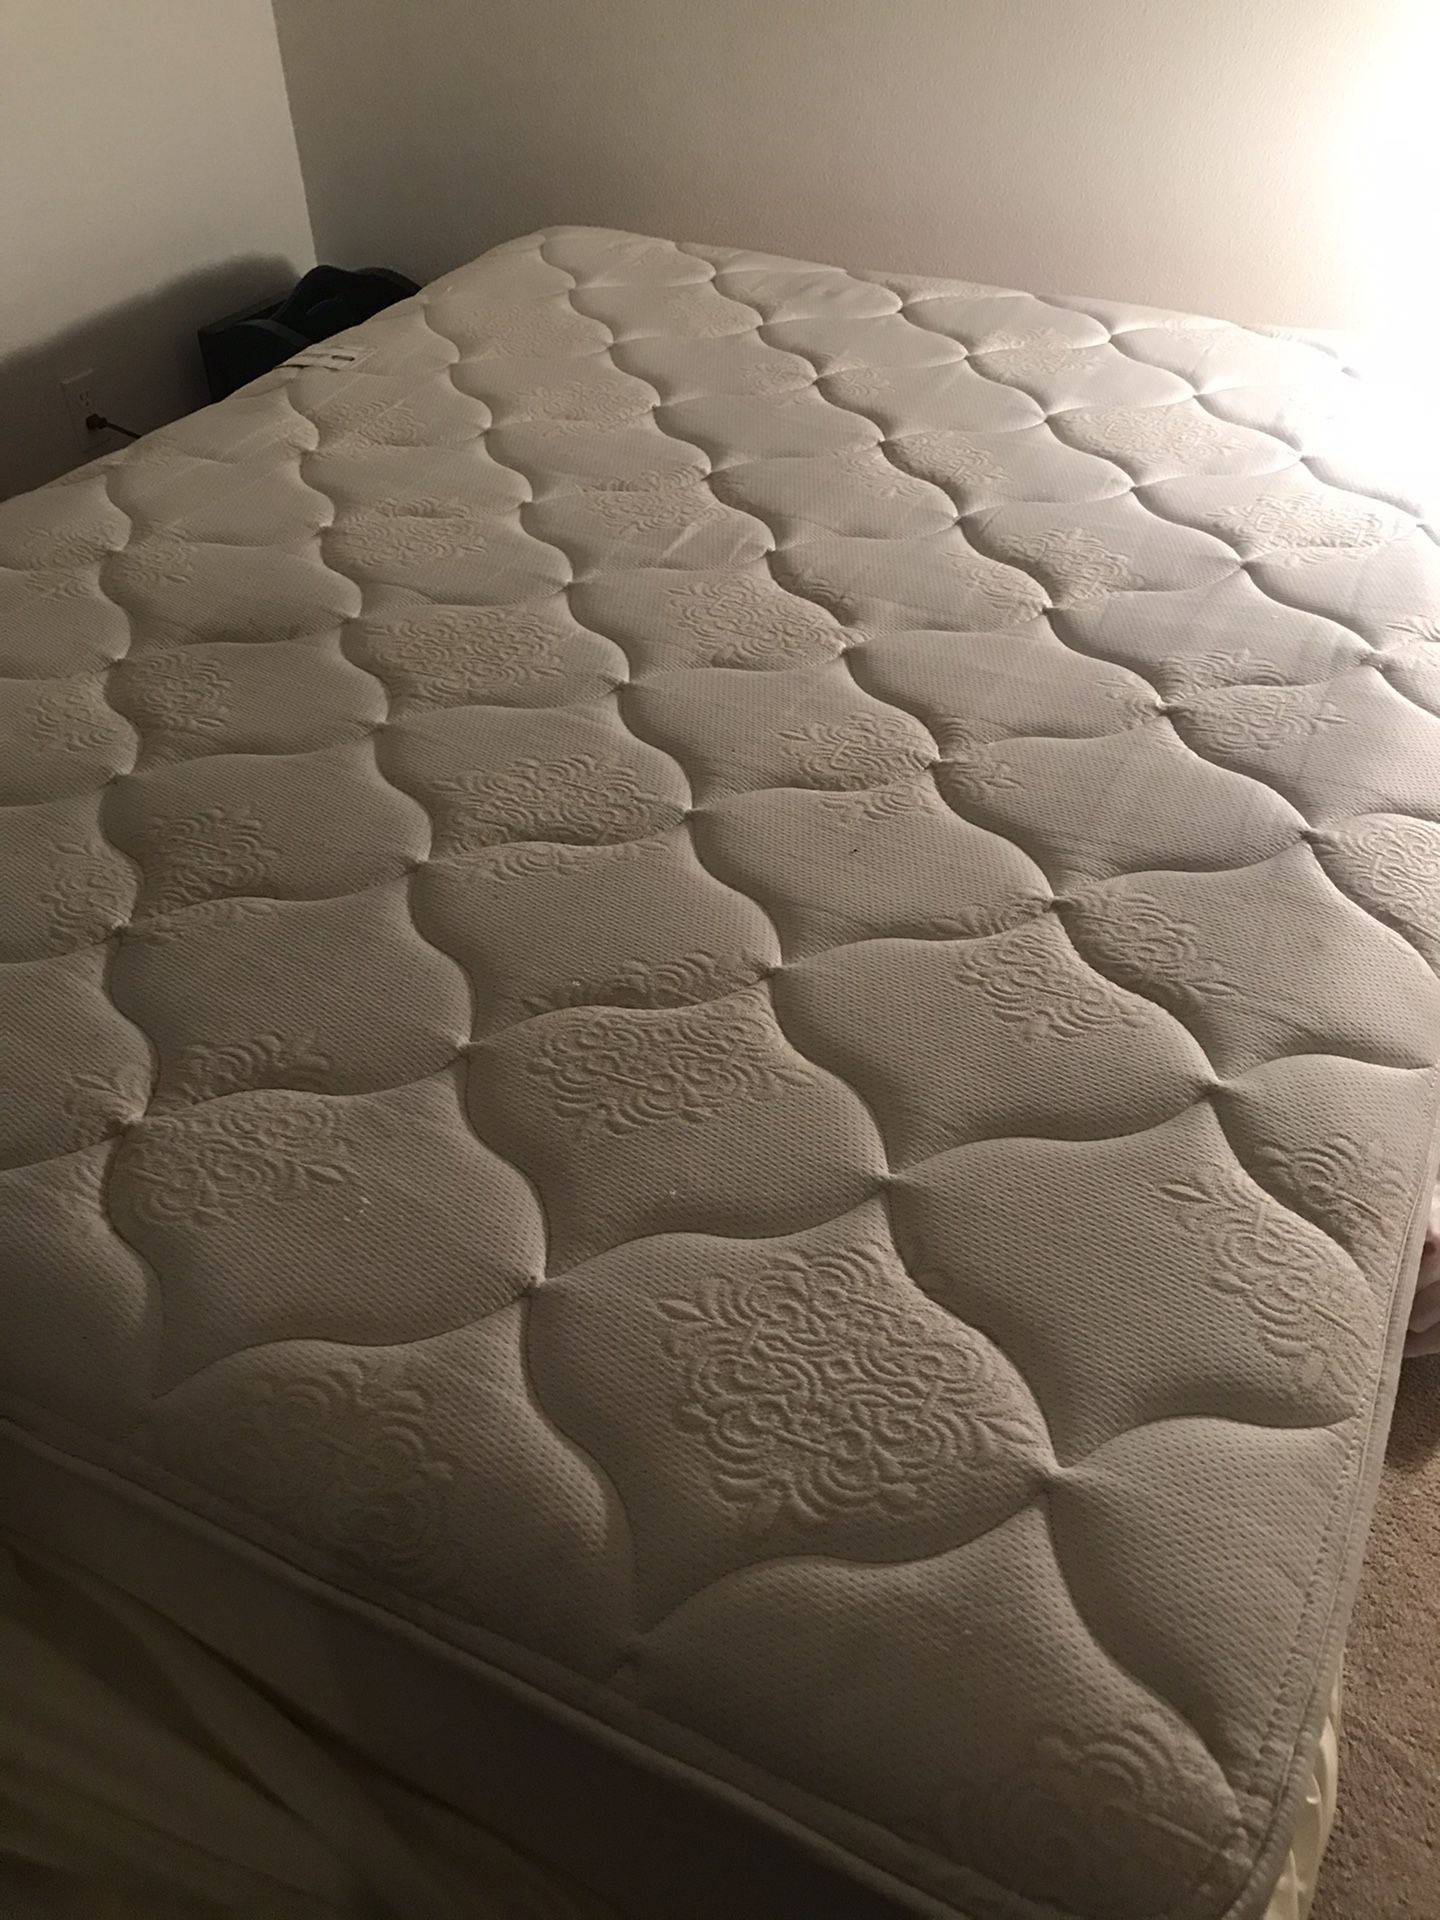 Queen mattress w/ box spring and metal bed frame